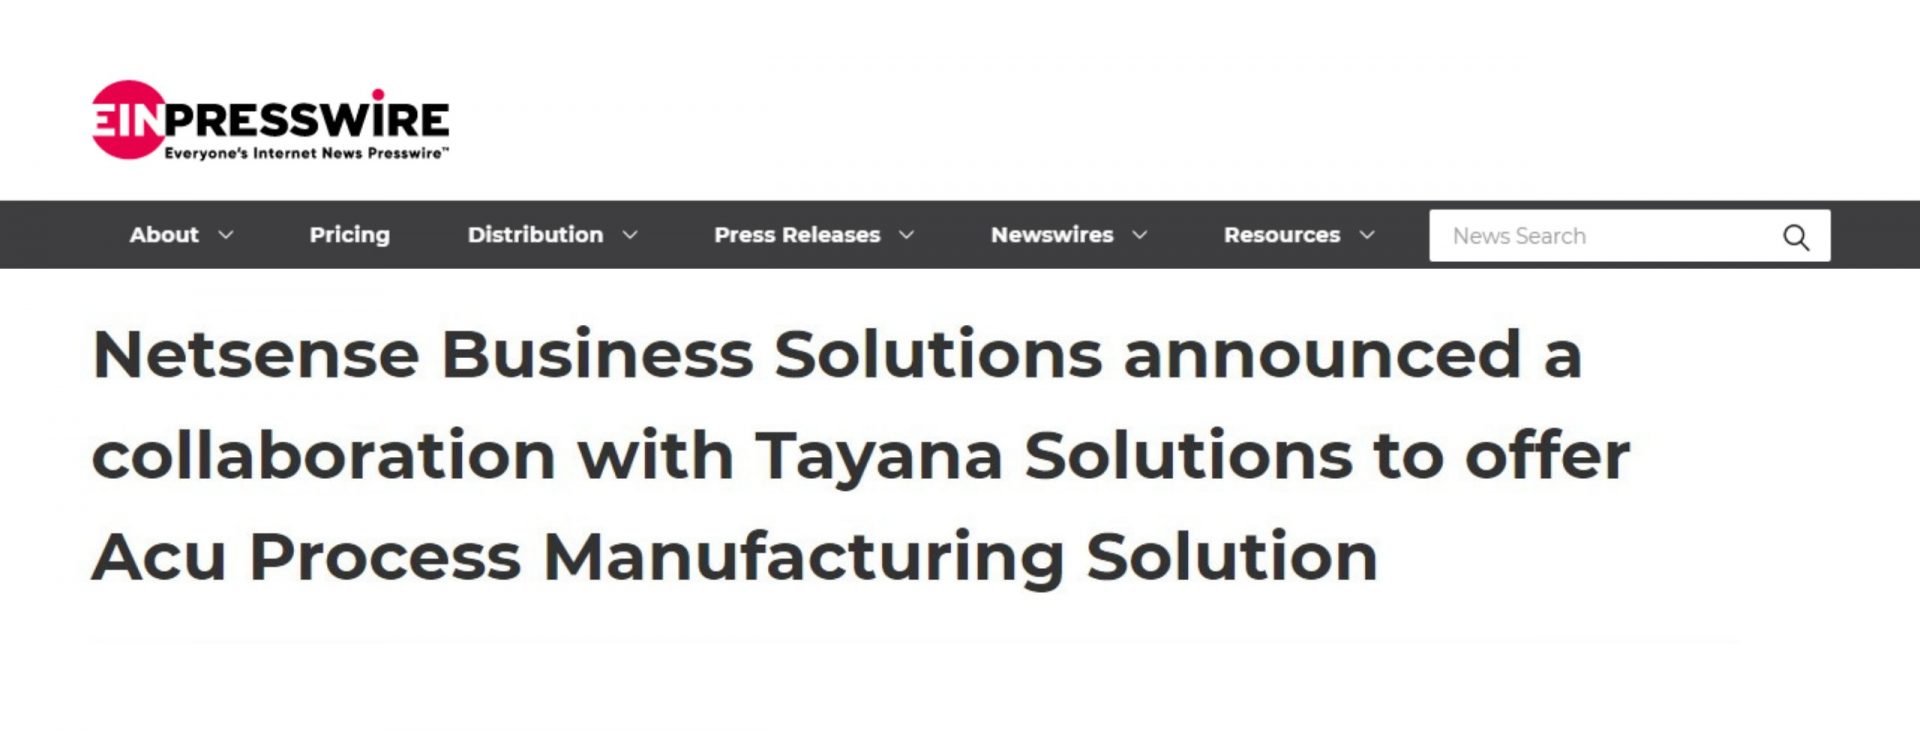 Netsense Business Solutions announced a collaboration with Tayana Solutions